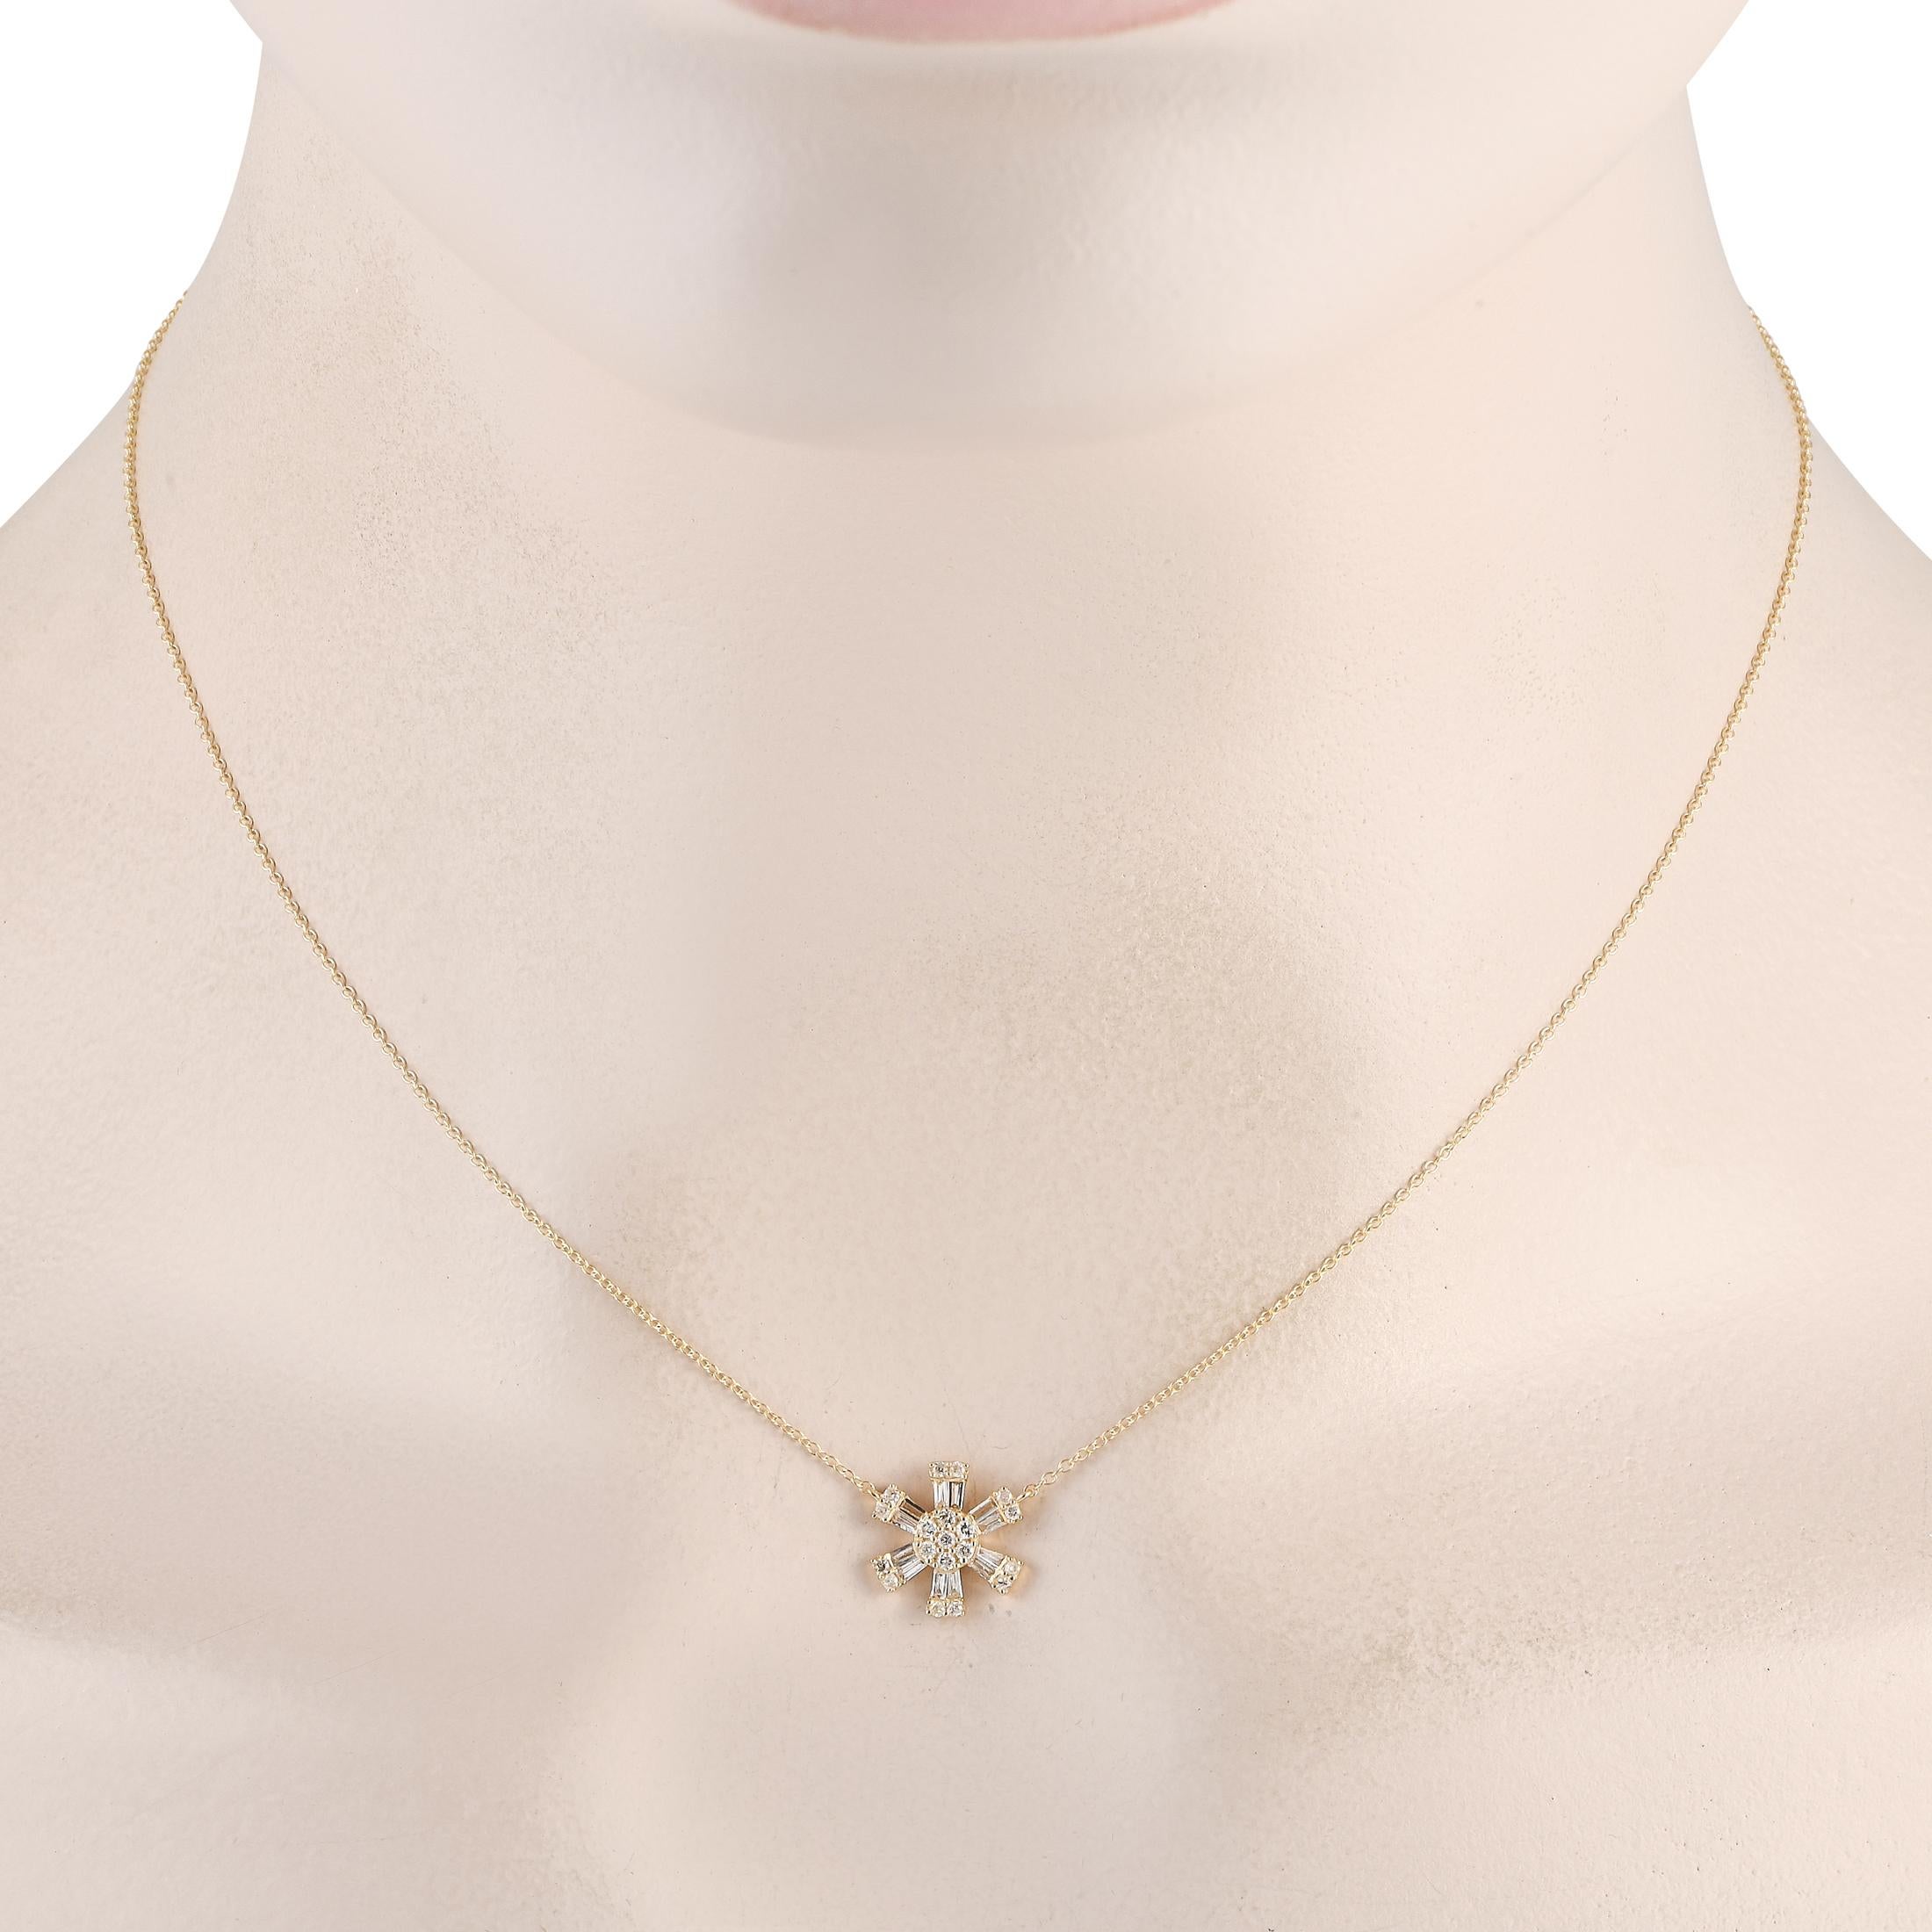 A subtle and sweet sparkler to bring casual elegance to your daily wear. This LB Exclusive necklace in 14K yellow gold features a thin, barely-there chain measuring 15.5 inches long. It comes with a lobster clasp and holds a pinwheel-style pendant